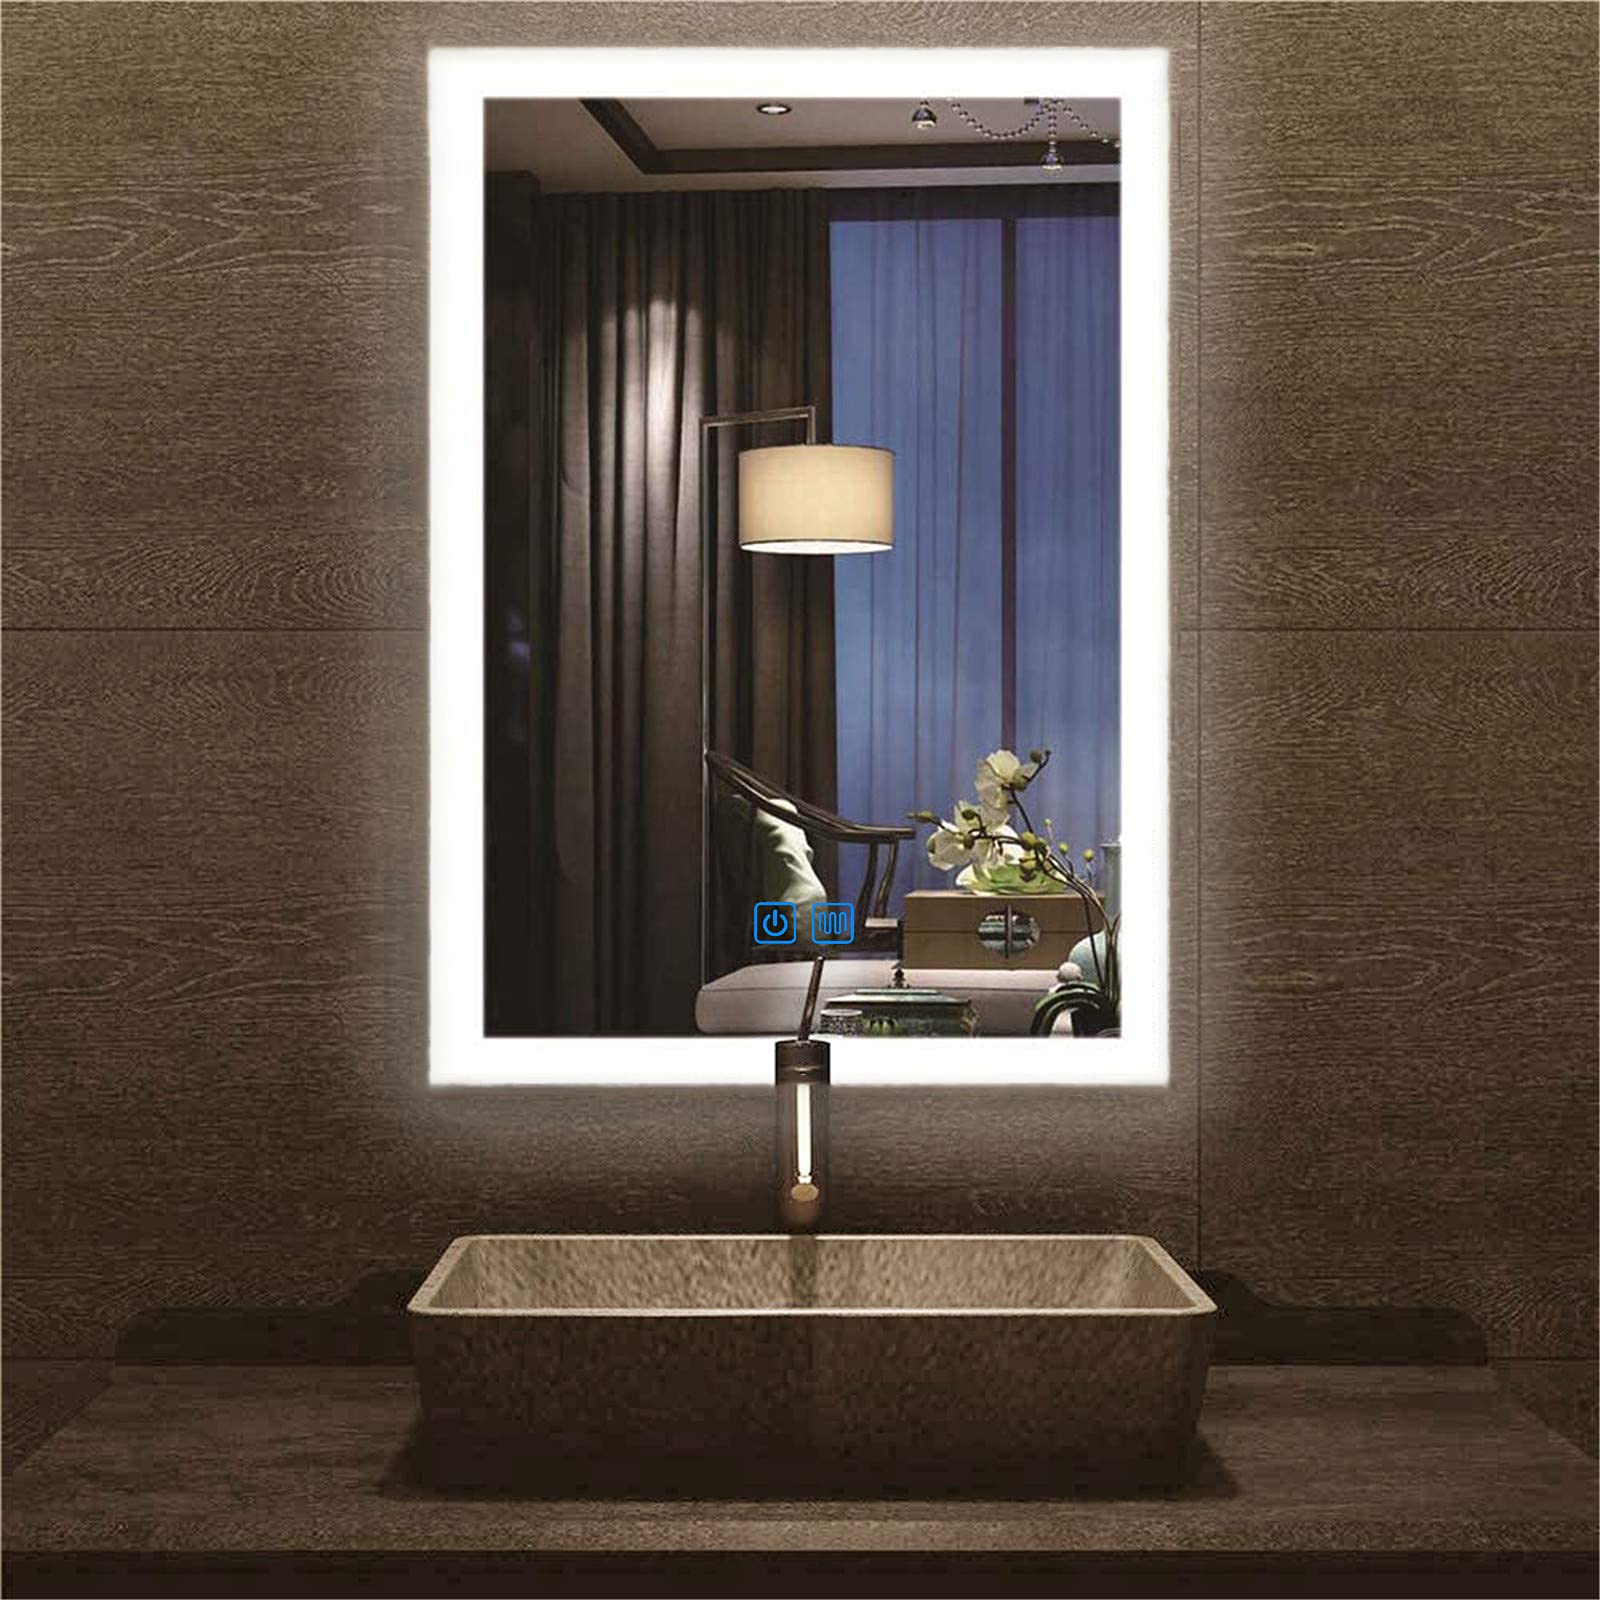 N/D 28 x 36 inch LED Makeup Bathroom Mirror Anti-Fog Dimmable Wall Vanity Mirror with Light,Vertical